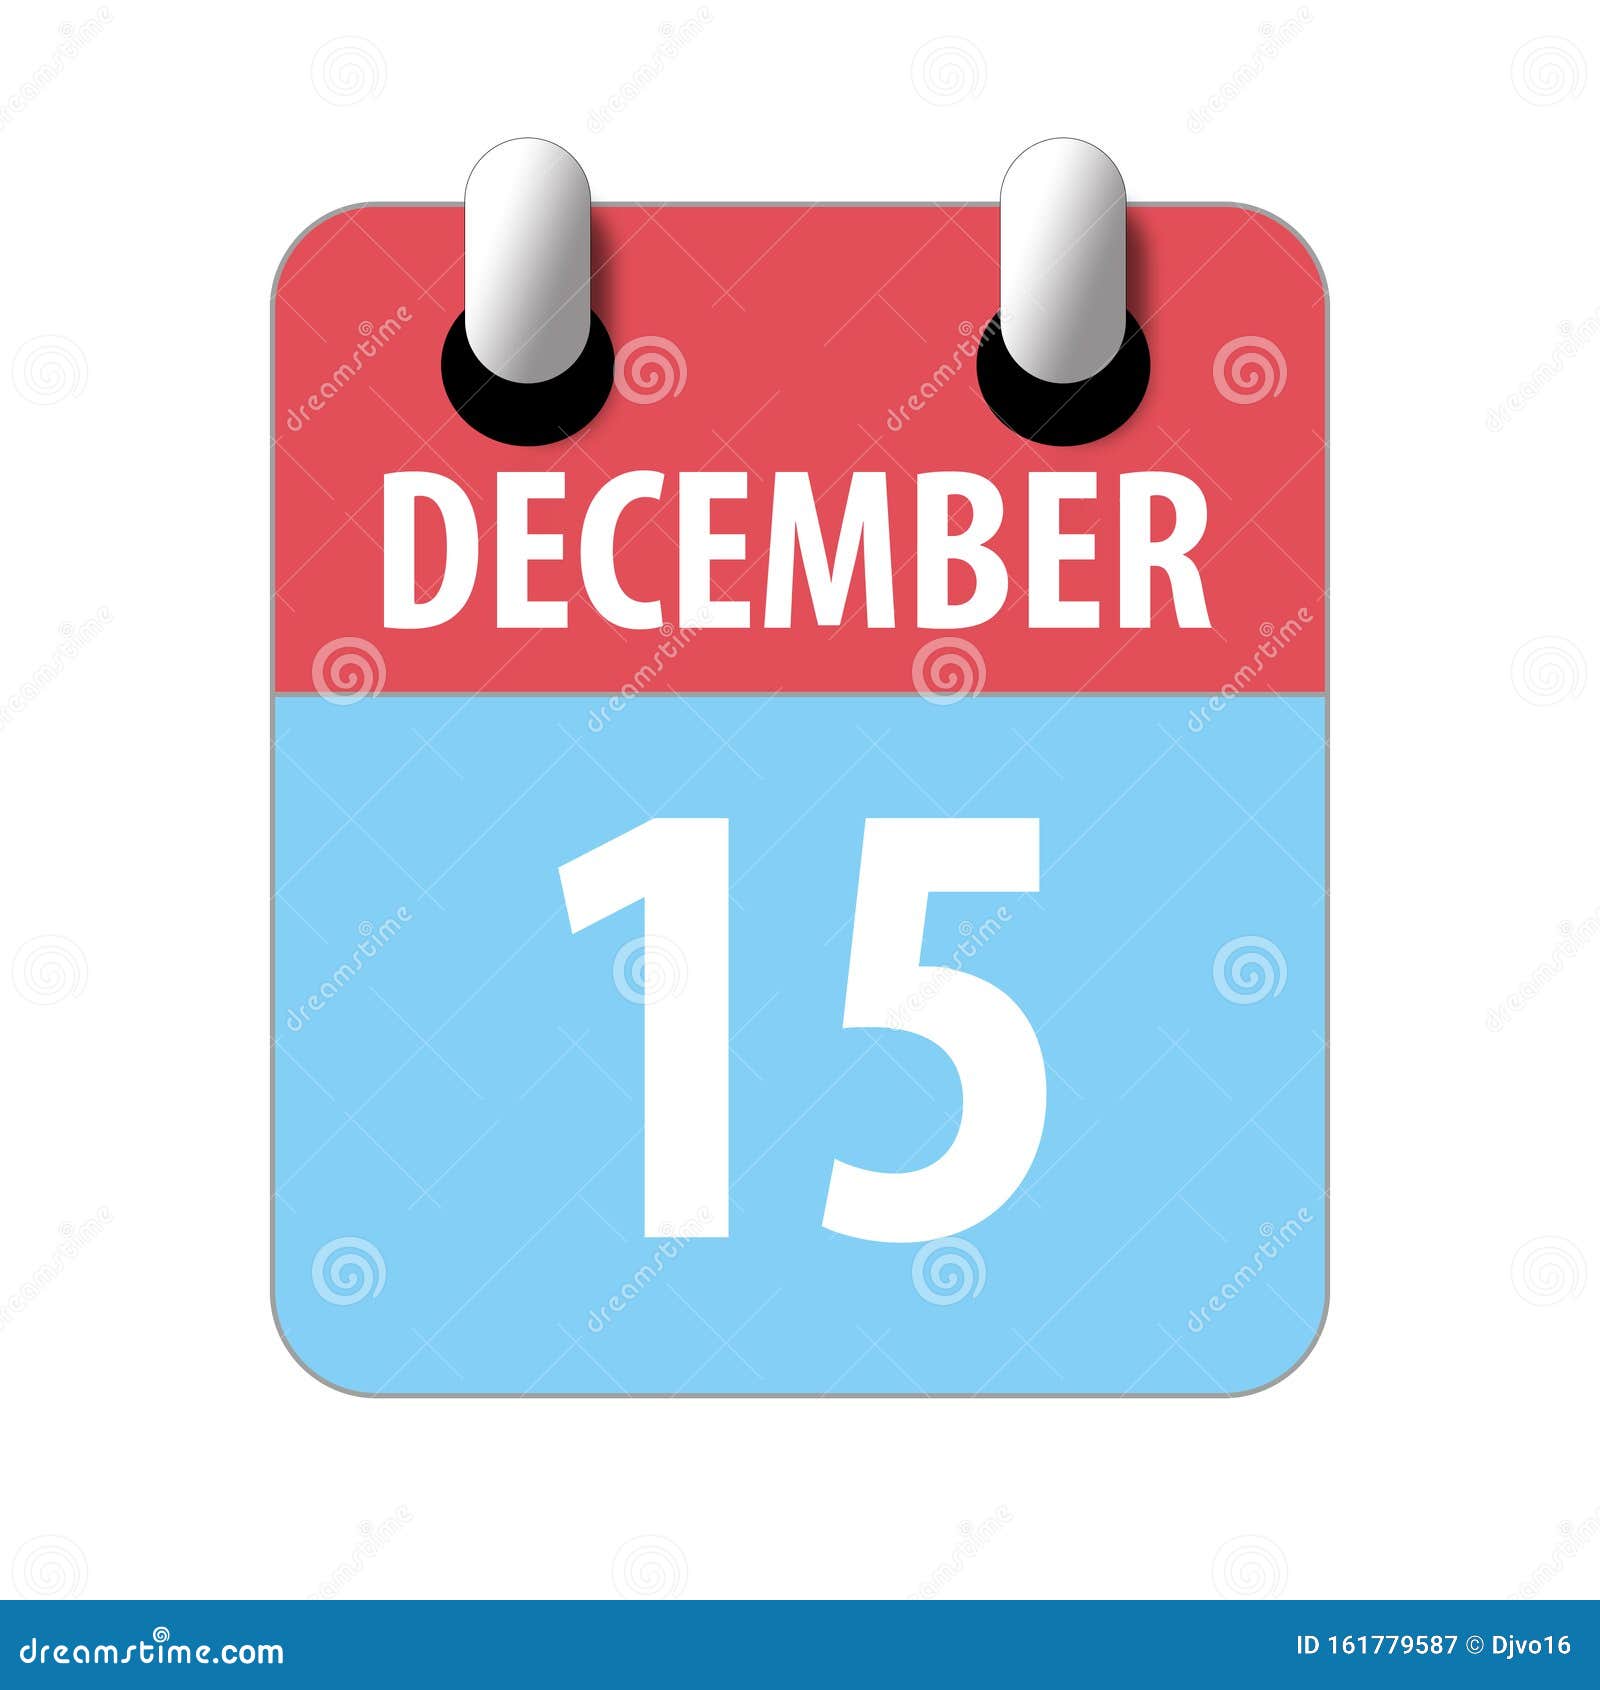 Collection 98+ Images what day is the 15th of december Stunning